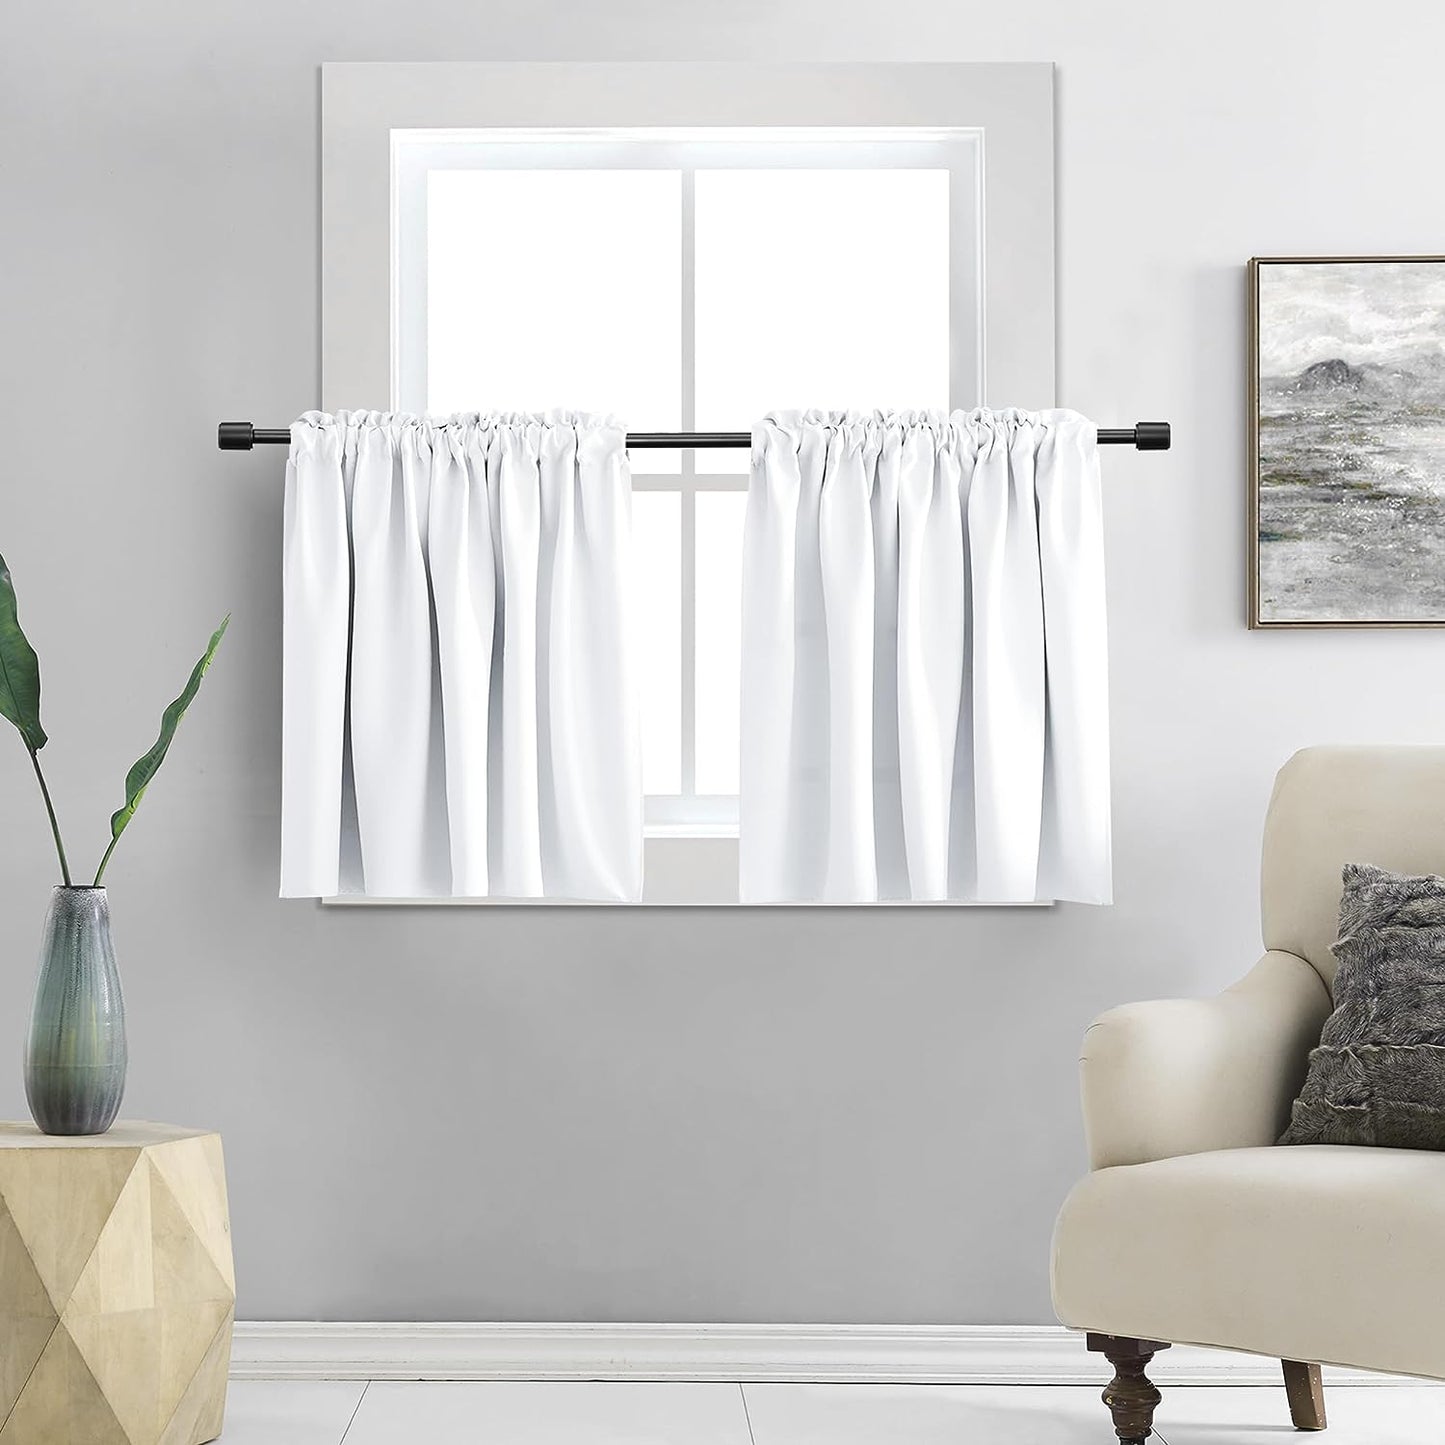 DONREN 24 Inch Length Curtains- 2 Panels Blackout Thermal Insulating Small Curtain Tiers for Bathroom with Rod Pocket (Black,42 Inch Width)  DONREN Pure White 42" X 30" 